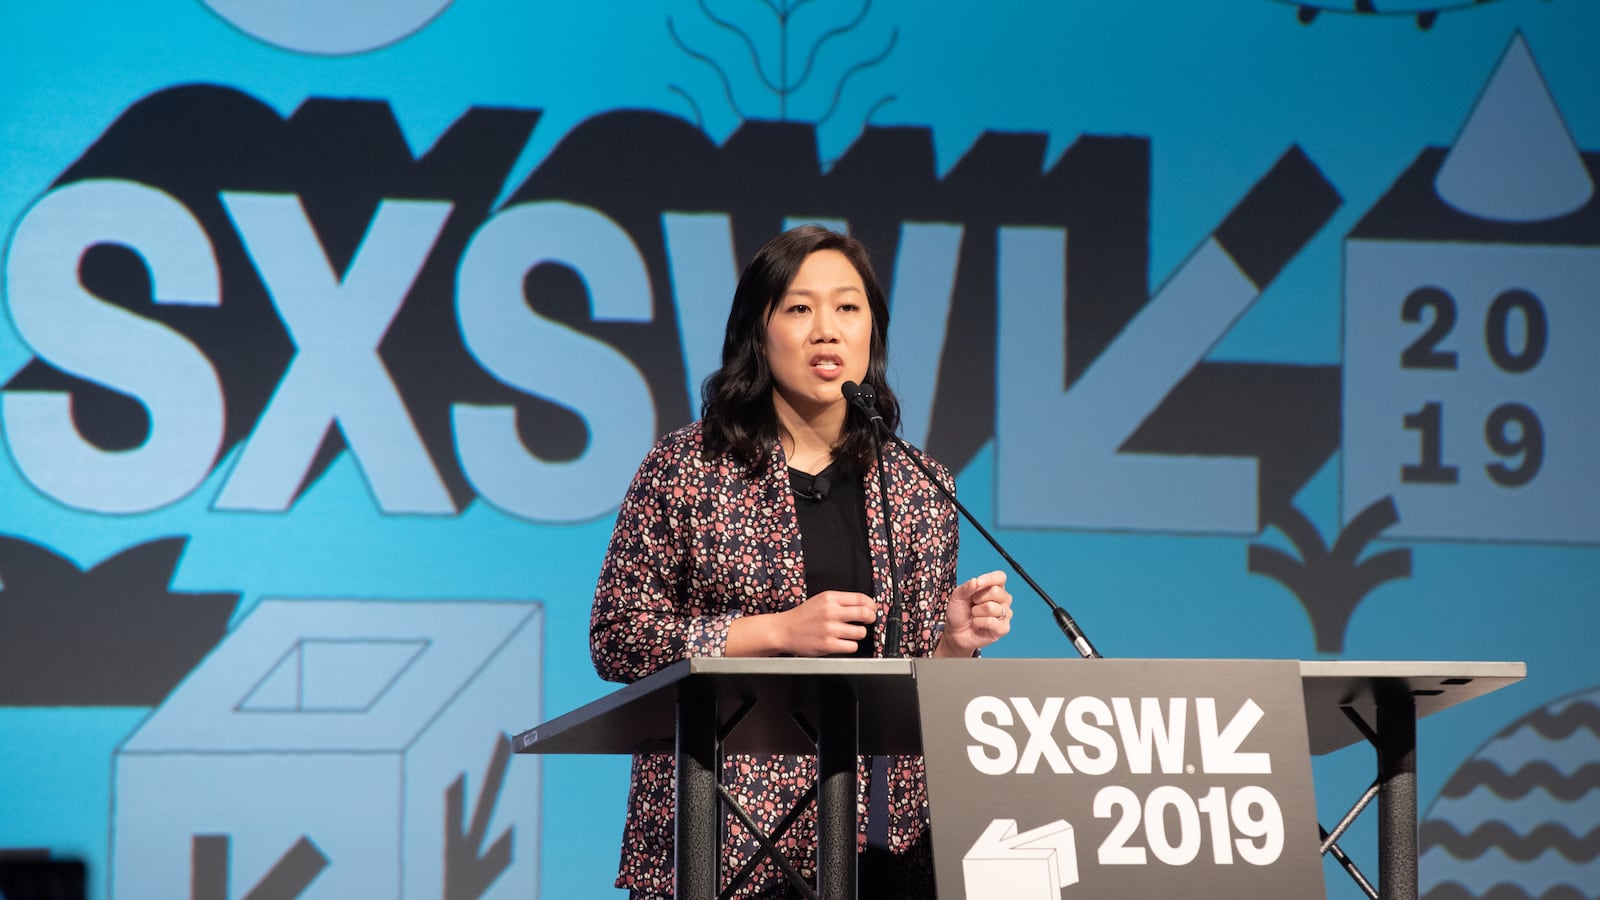 AUSTIN, TEXAS - MARCH 08: Priscilla Chan of the Chan Zuckerberg Initiative speaks at the Hilton during SXSW on March 08, 2019 in Austin, Texas. (Photo by Jim Bennett/WireImage)